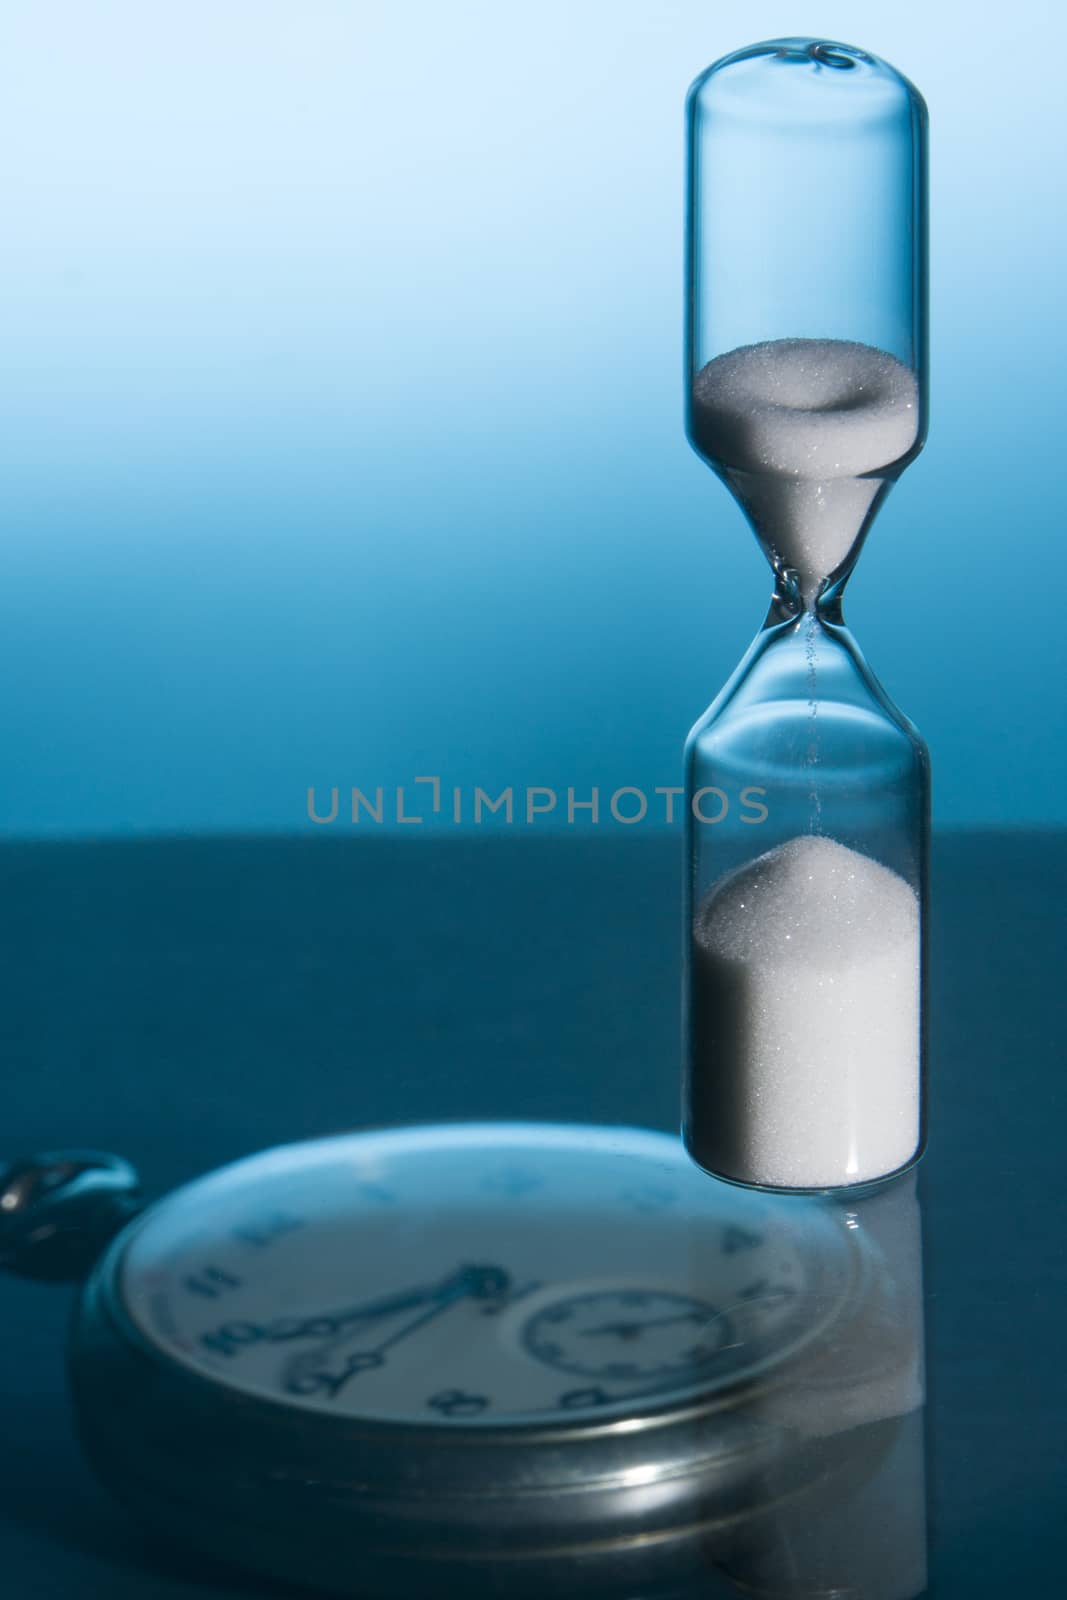 Hourglass and pocket watch with blue background